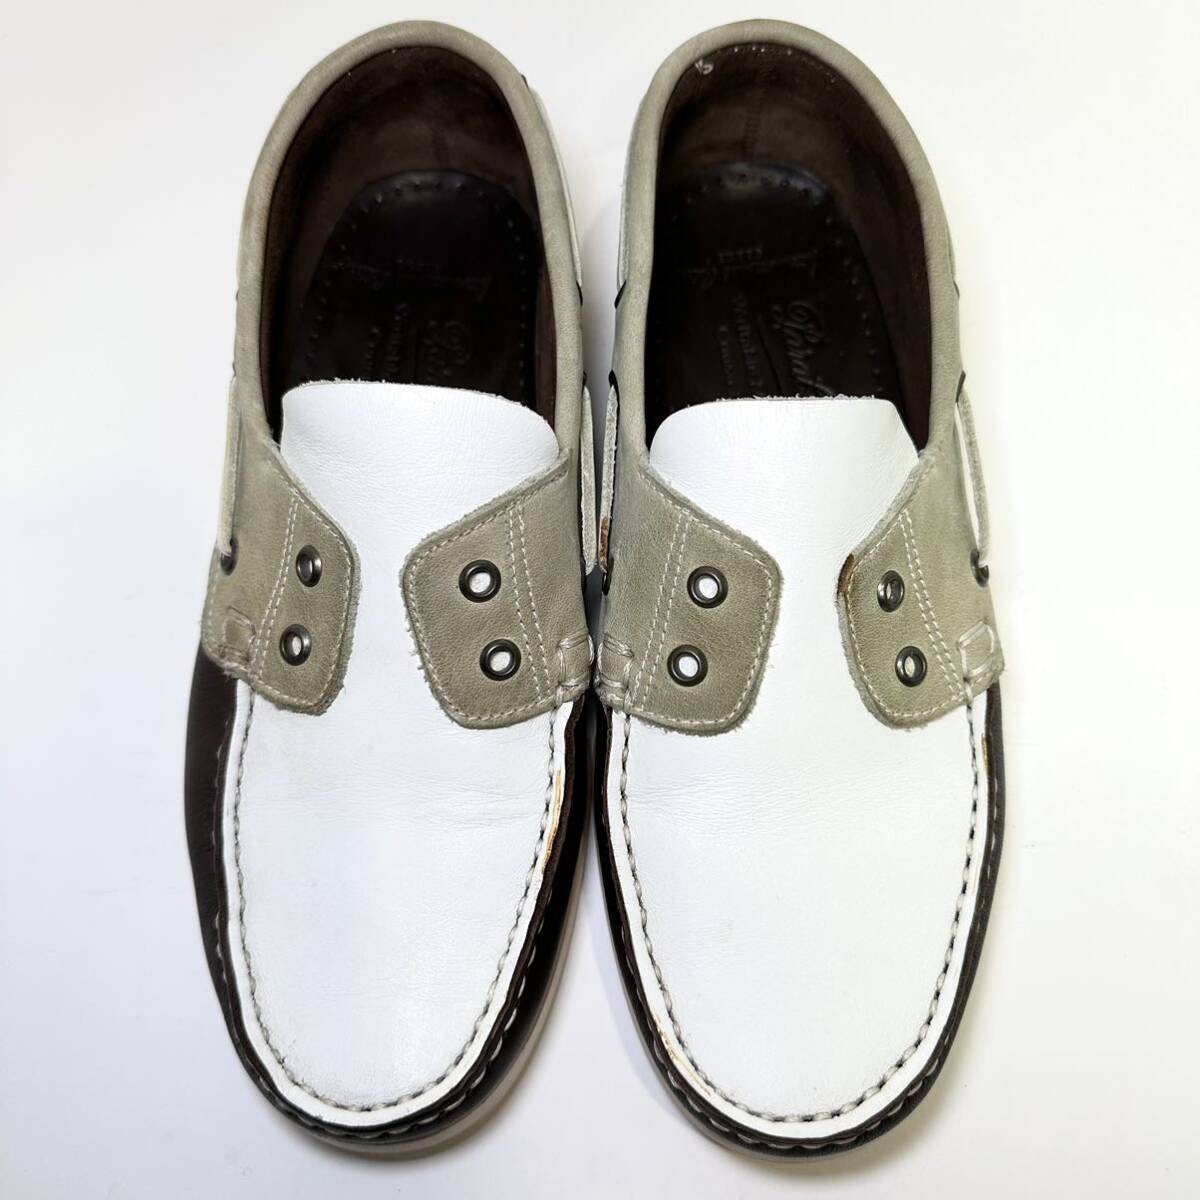  prompt decision /Paraboot BEAMS Paraboot Beams special order deck shoes MARINE moccasin white Brown UK 6.5 25.0 Loafer / slip-on shoes 